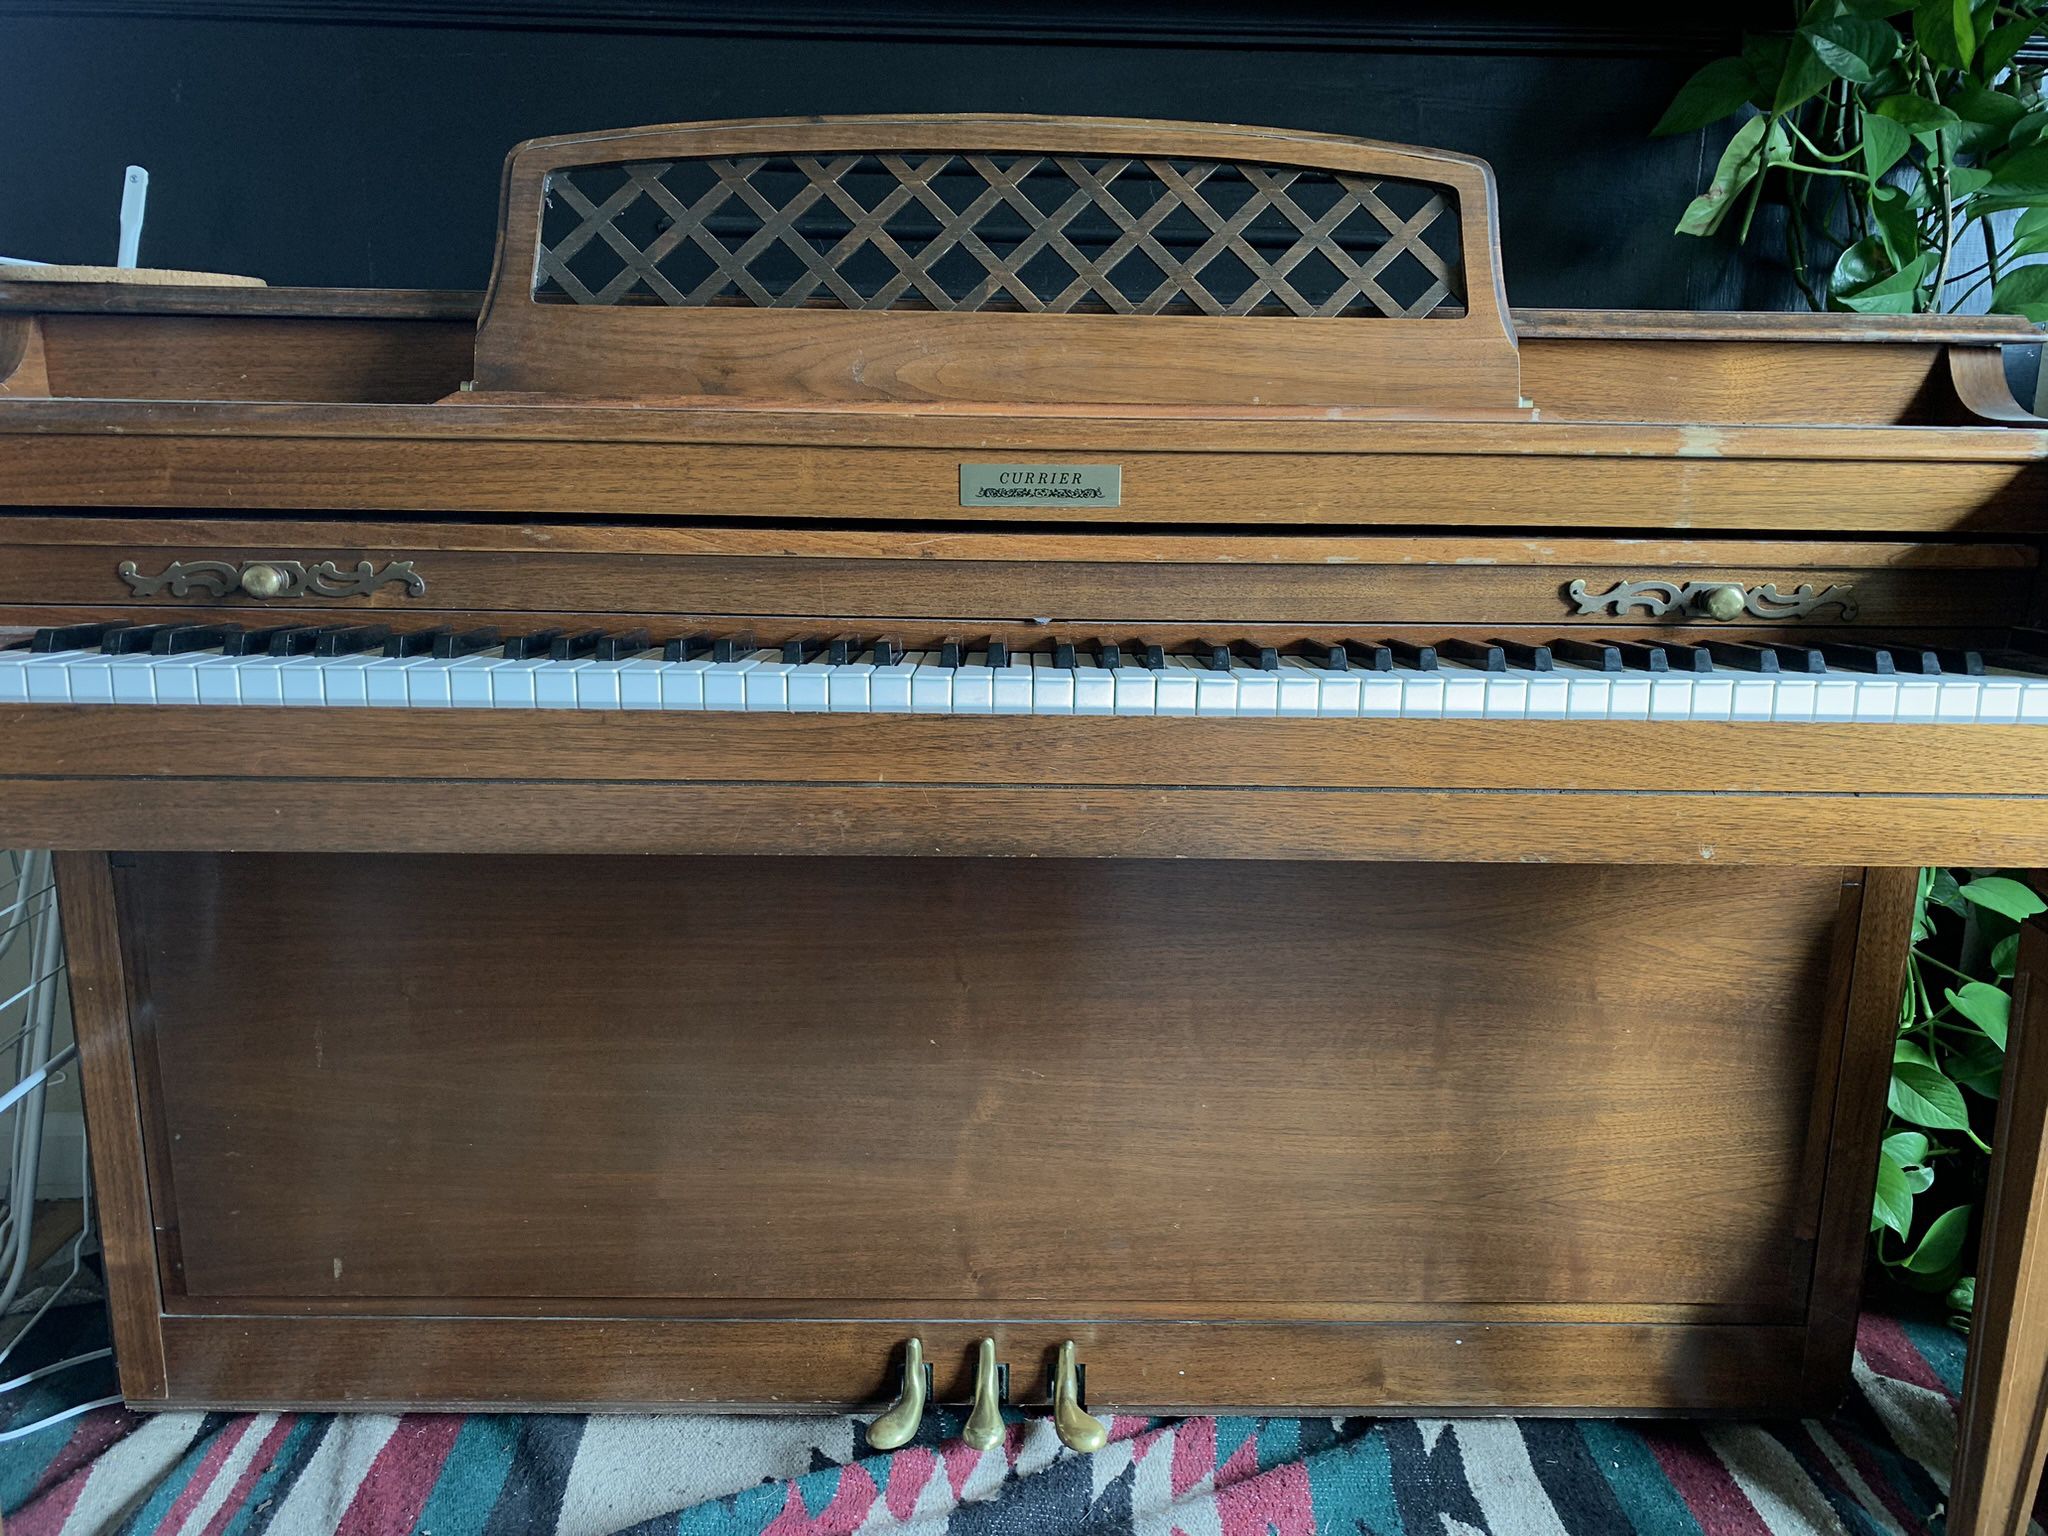 Currier upright Piano